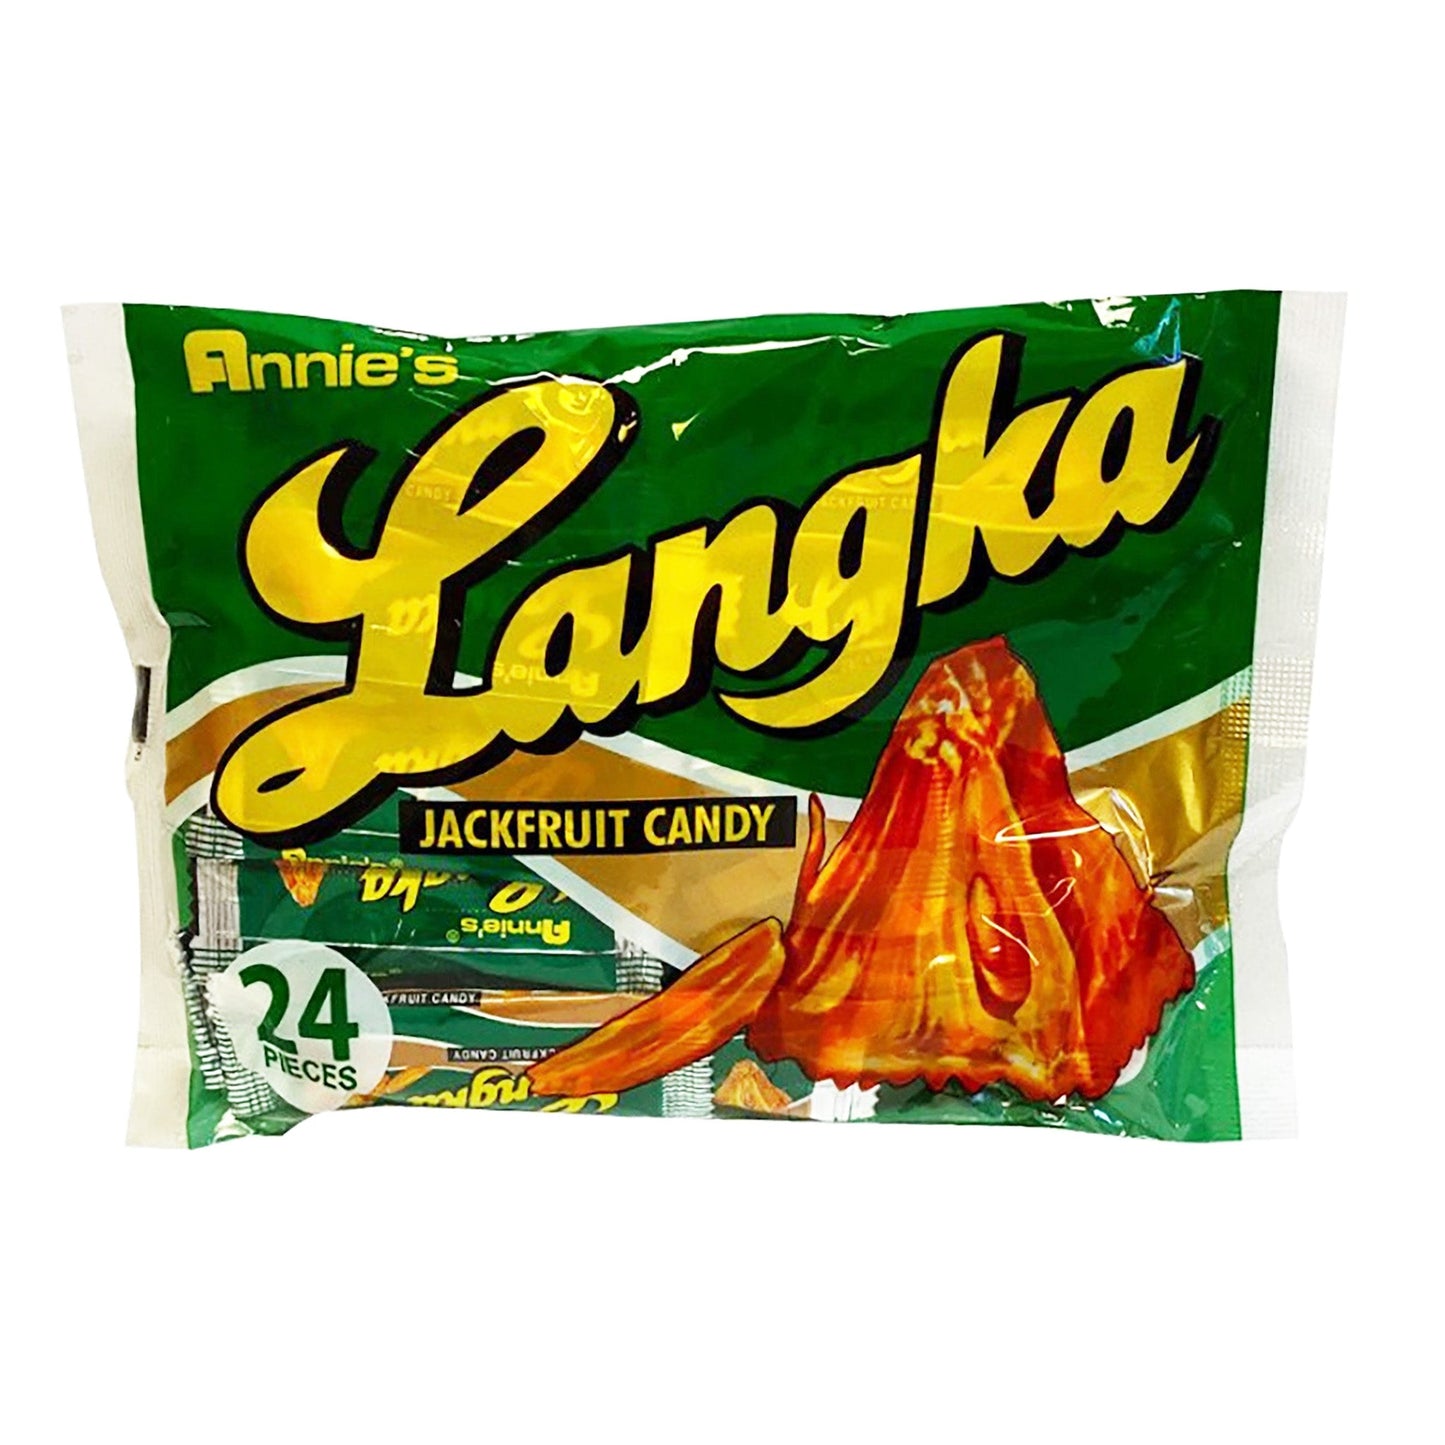 Front graphic image of Annie's Jackfruit Candy - Langka 5.12oz